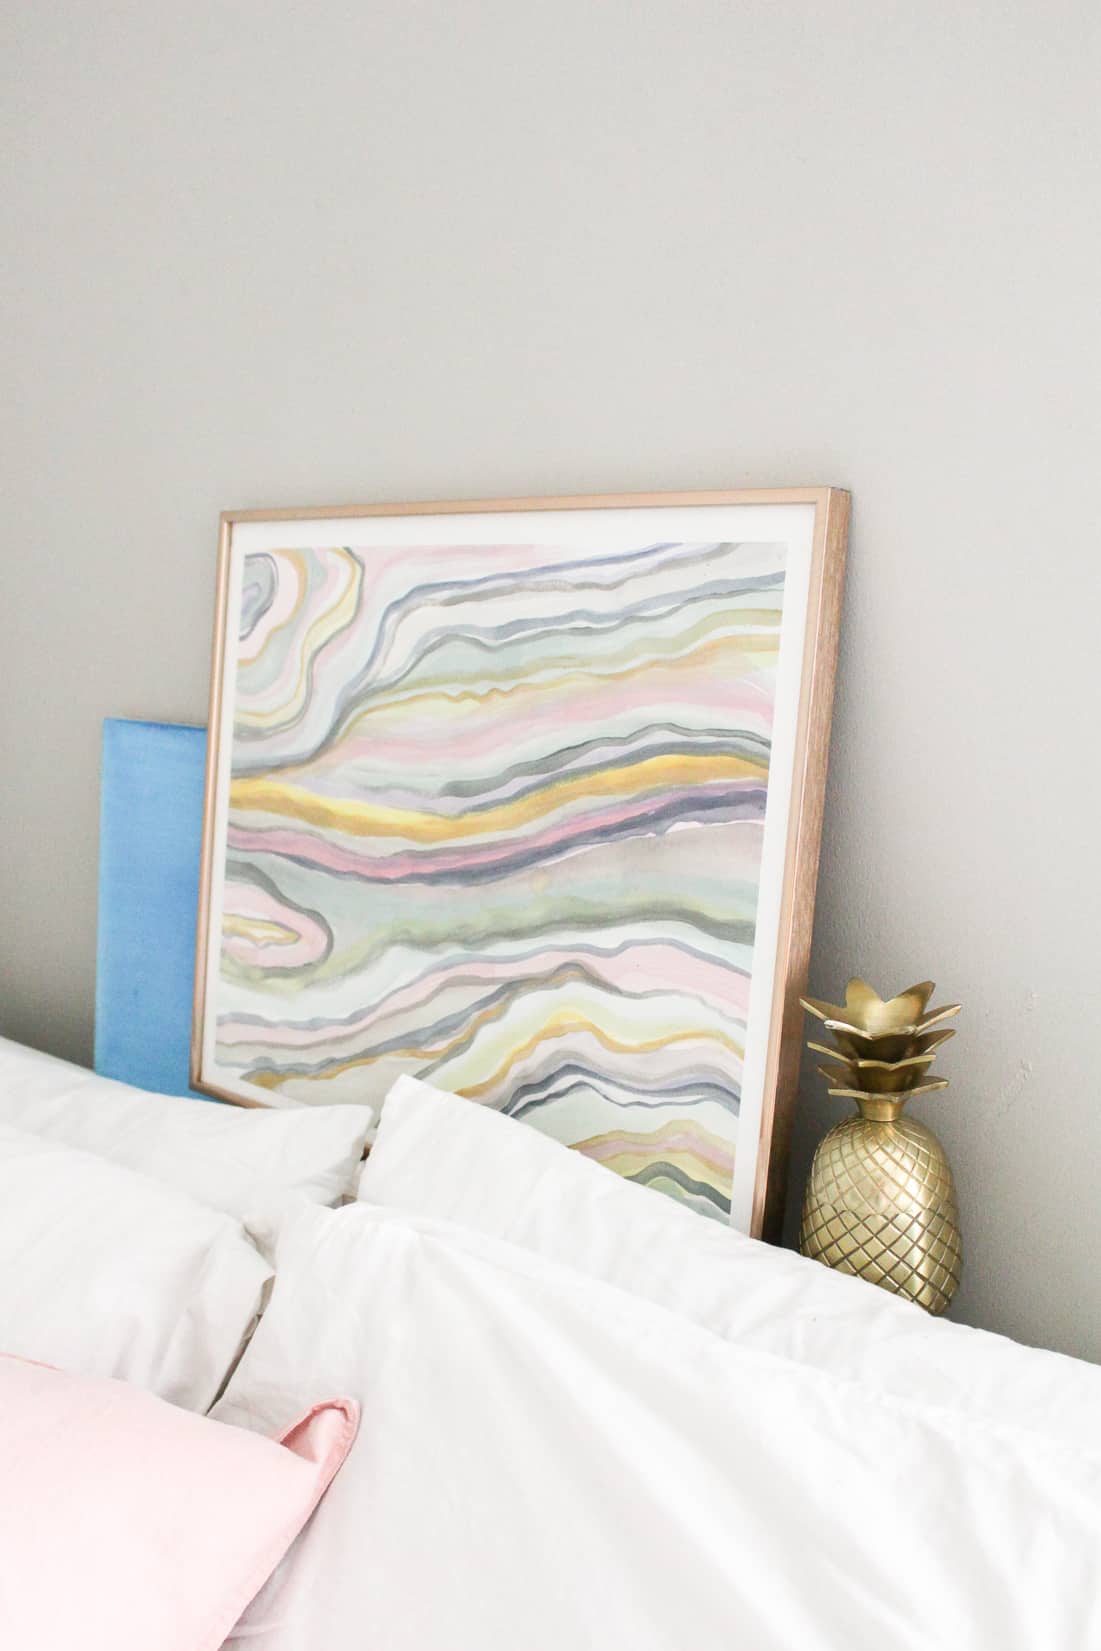 4 DIY Home Decor Projects to Try: DIY Anthropologie Hack Marbled Wall Art on Brit + Co | Fish & Bull